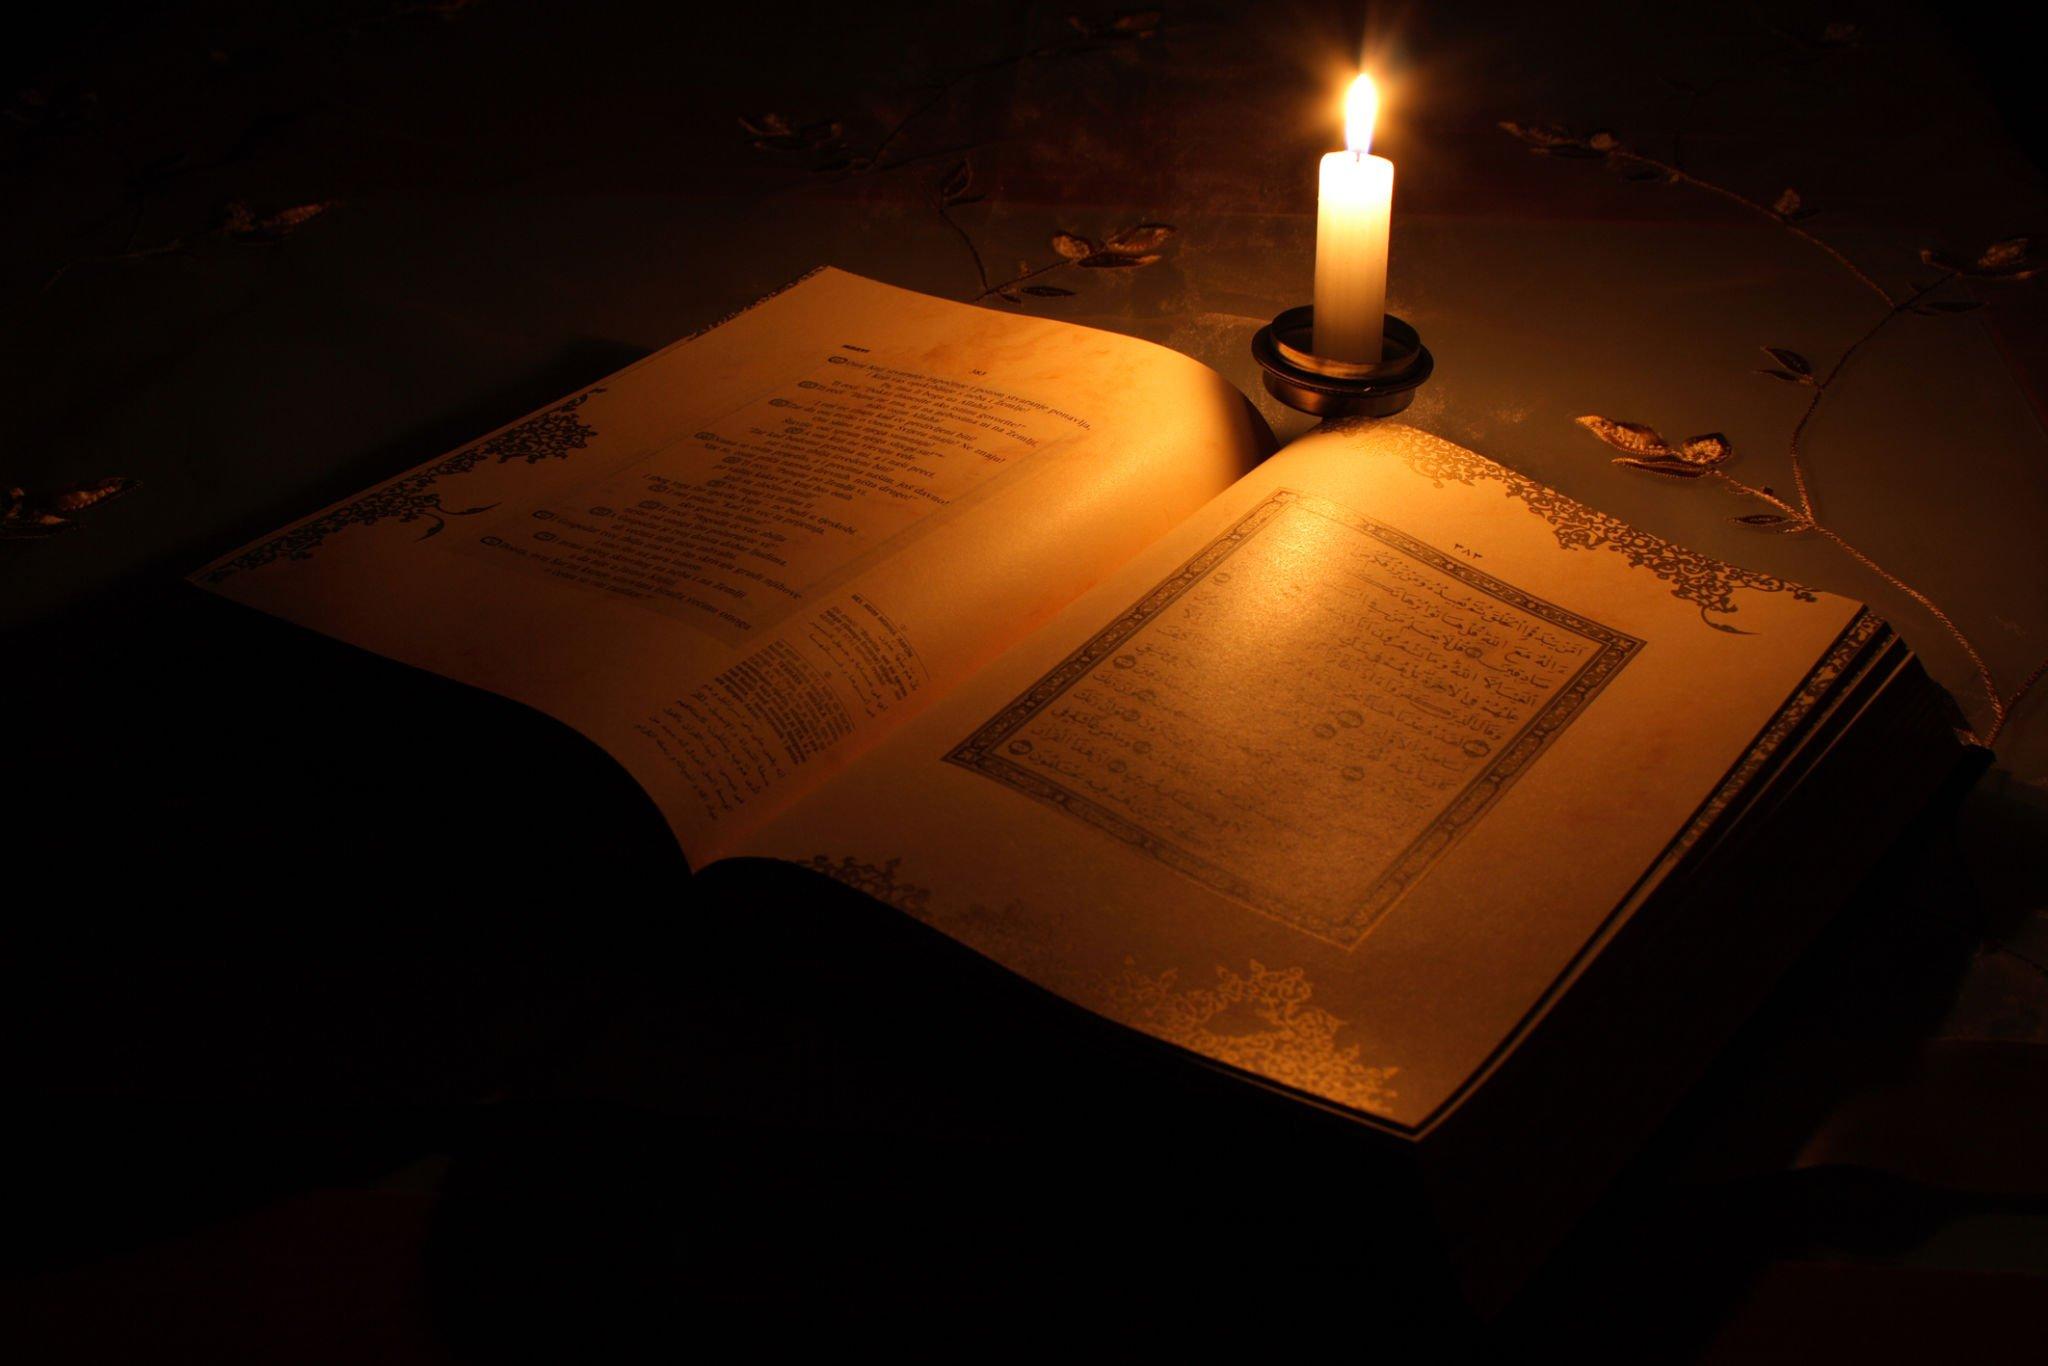 httpswww.istockphoto.comphotoholy-koran-laying-open-on-a-desk-with-one-lit-candle-gm174901607-2286482phra